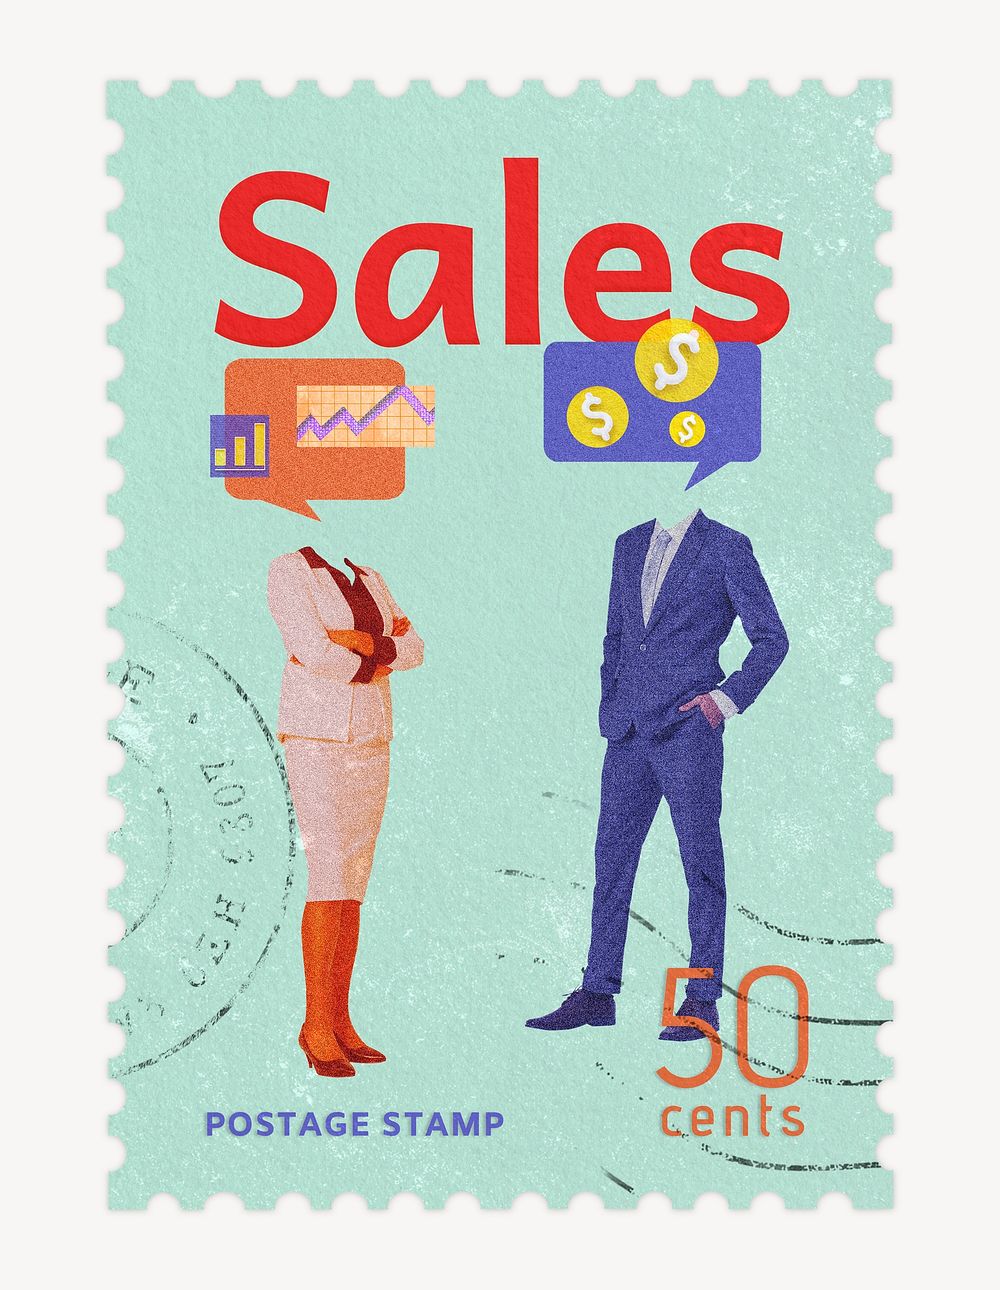 Sales postage stamp, business stationery collage element